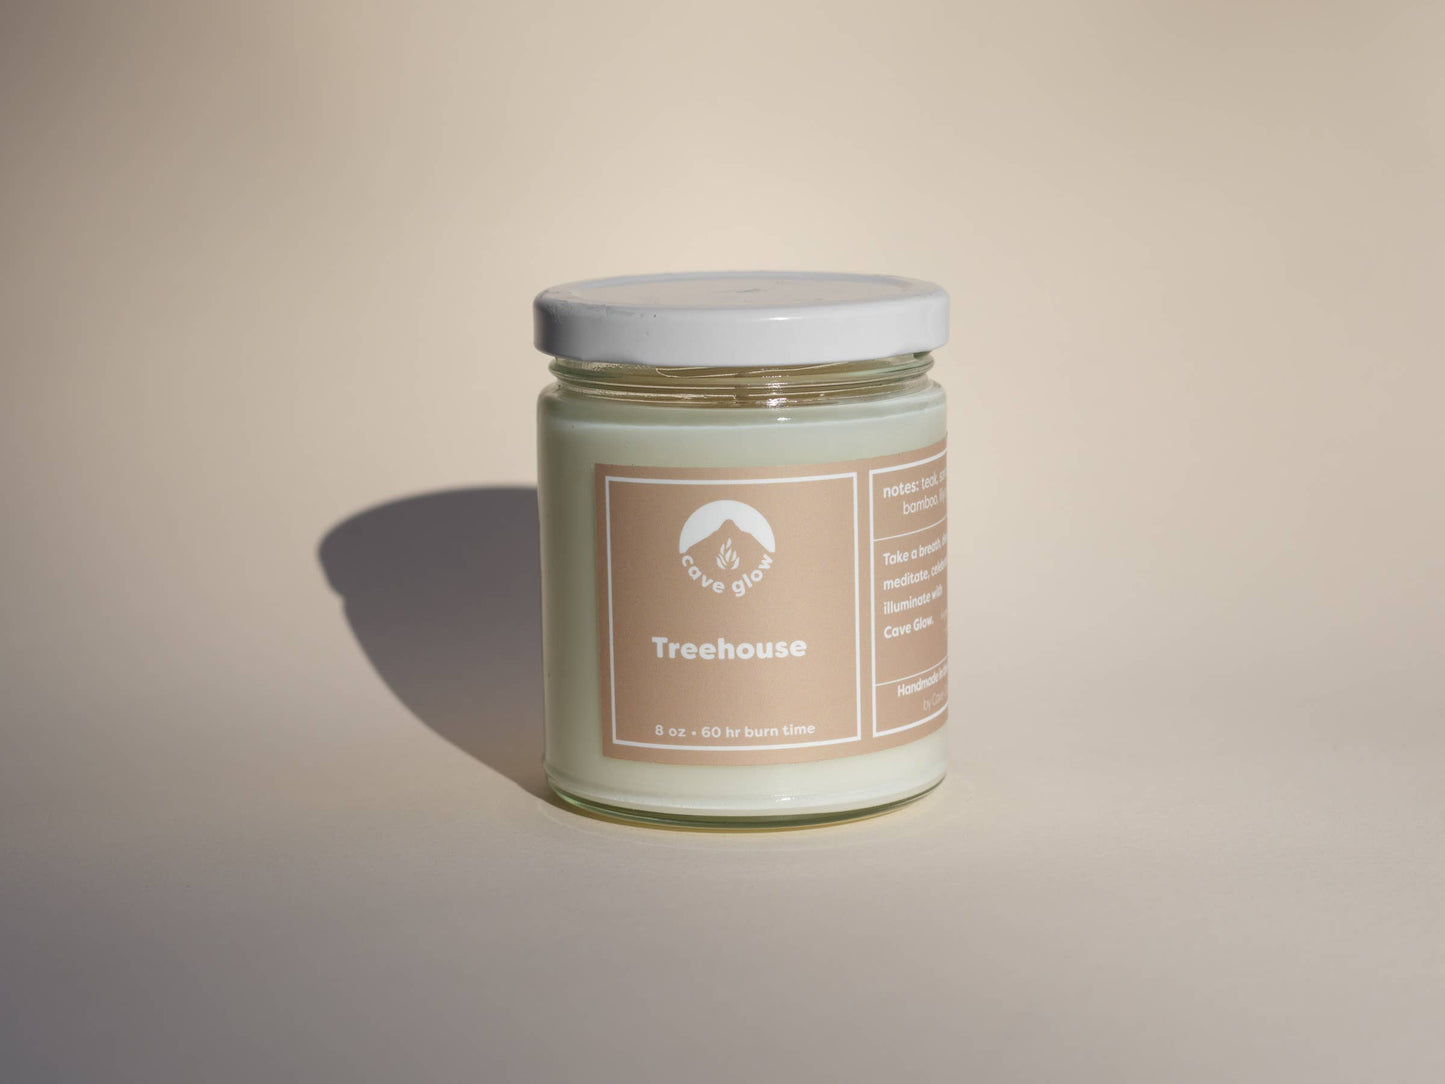 Cave Glow Candles - Treehouse